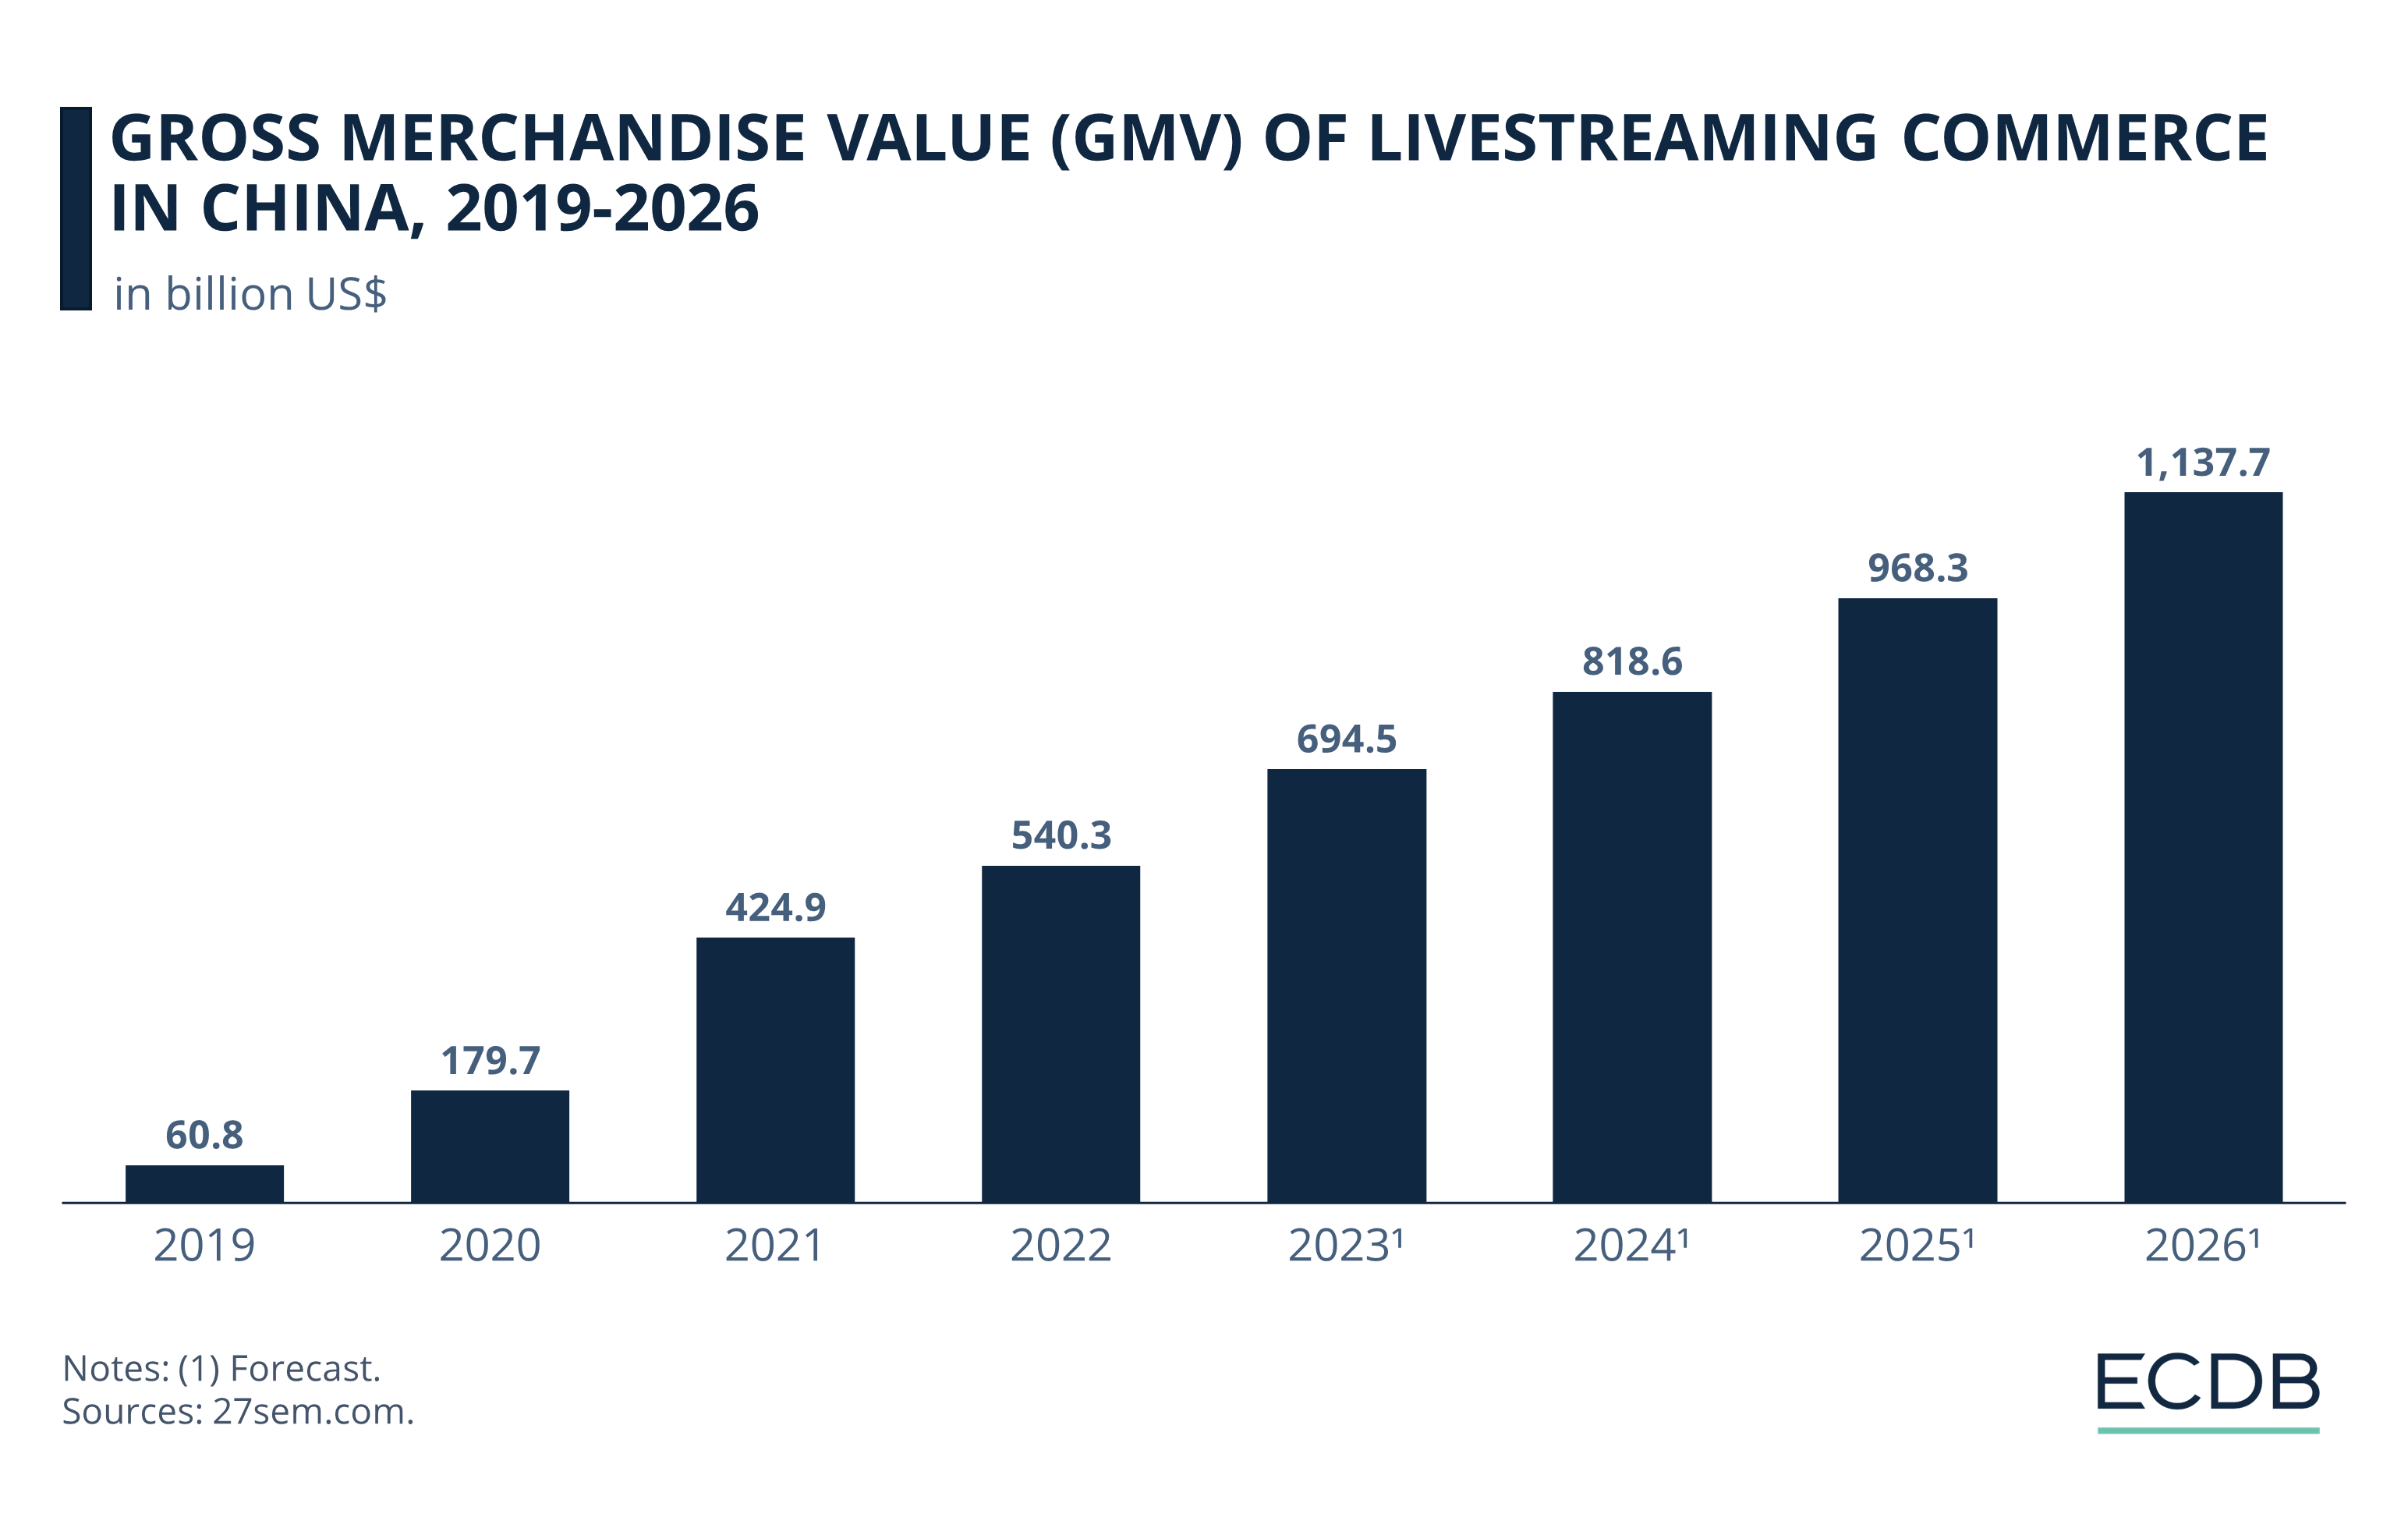 Gross Merchandise Value of Livestreaming Commerce in China, 2019-2026